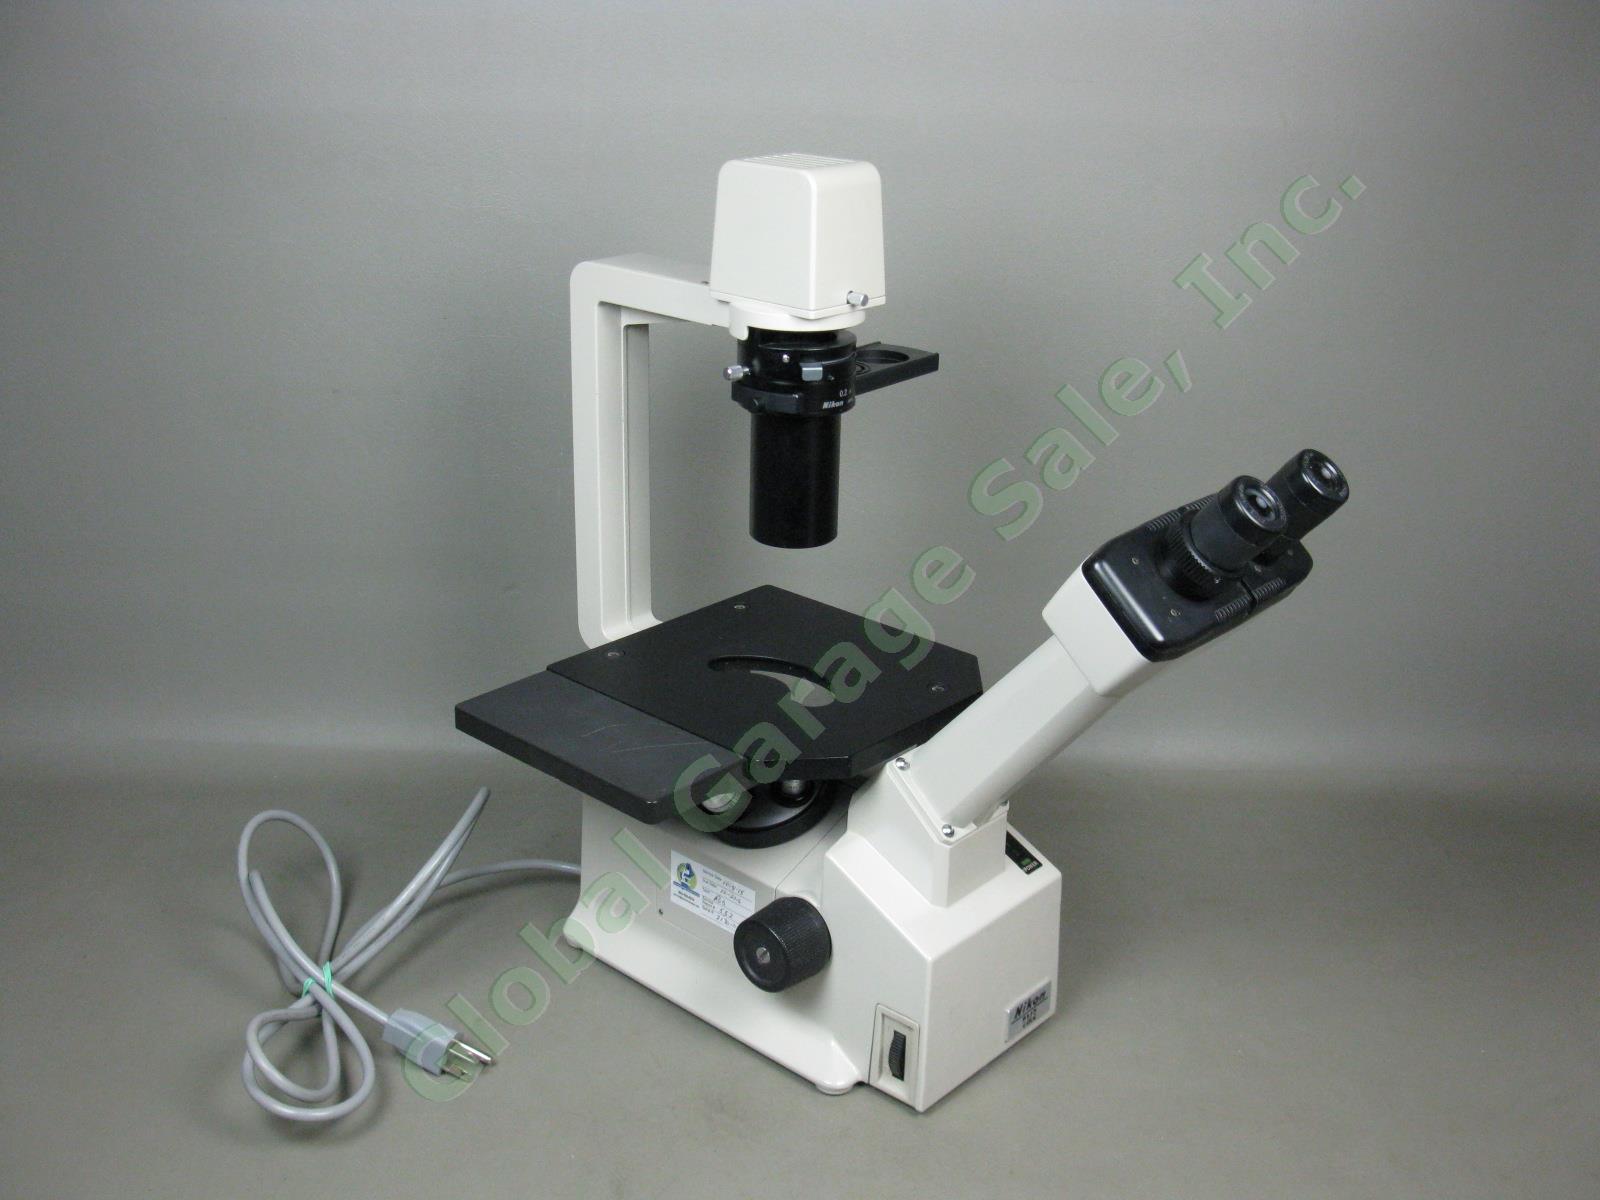 Nikon TMS Inverted Phase Contrast Microscope W/ 4 Objectives DLL 10 Ph 1-2 DL 20